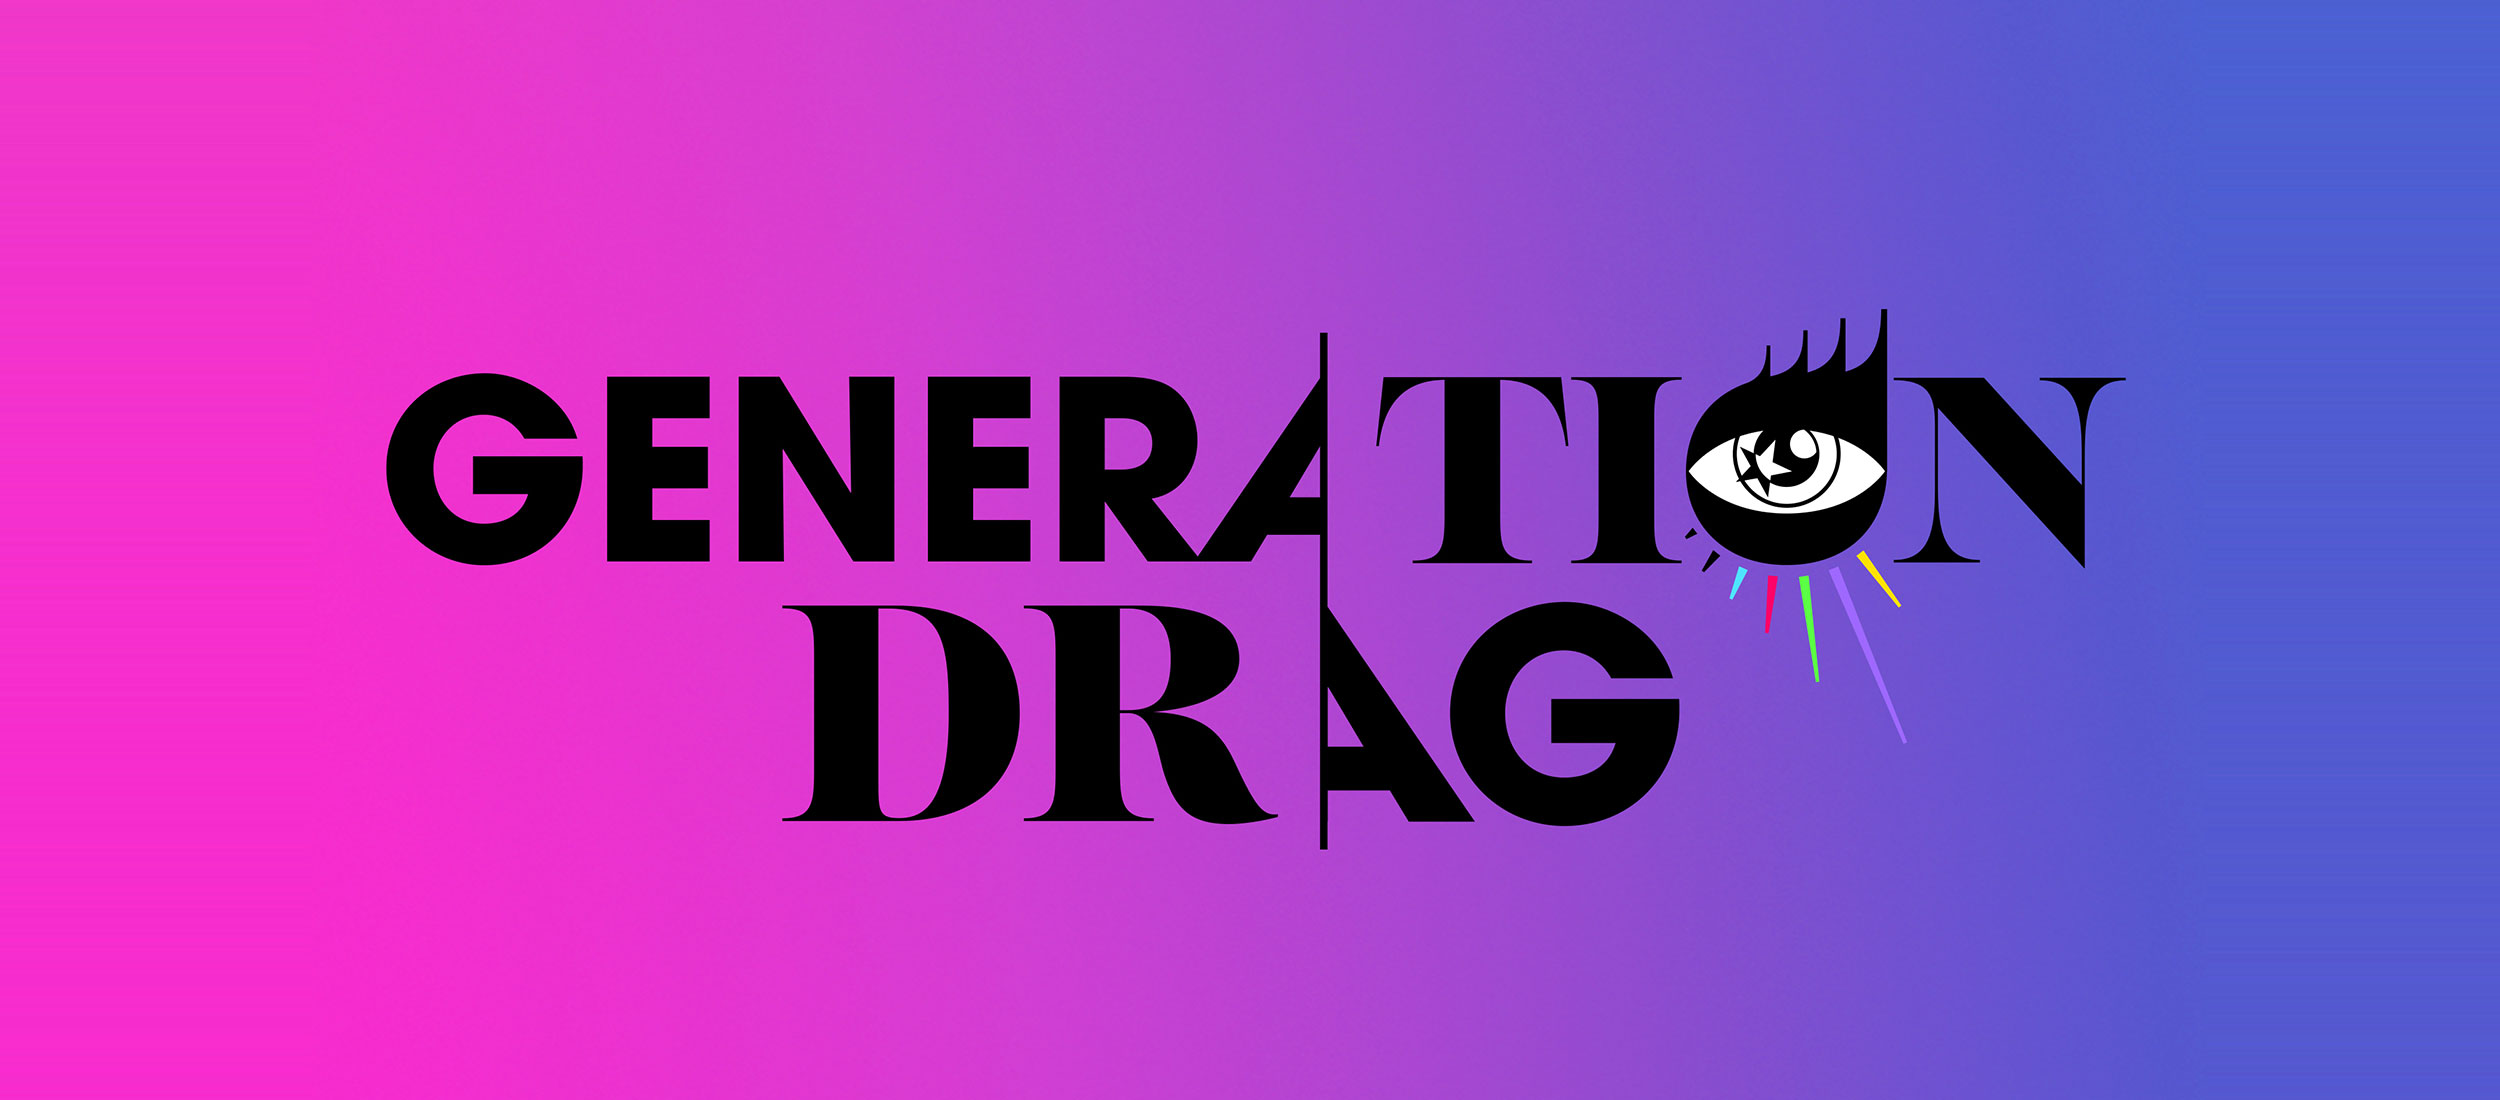 Here We Go and The Devil is a Lie: Shame on Tyra Banks Who is Producing a New Show About Teenage Drag Performers Called “Generation Drag” on Discovery+ Which We Thought Was a Family-Based Channel